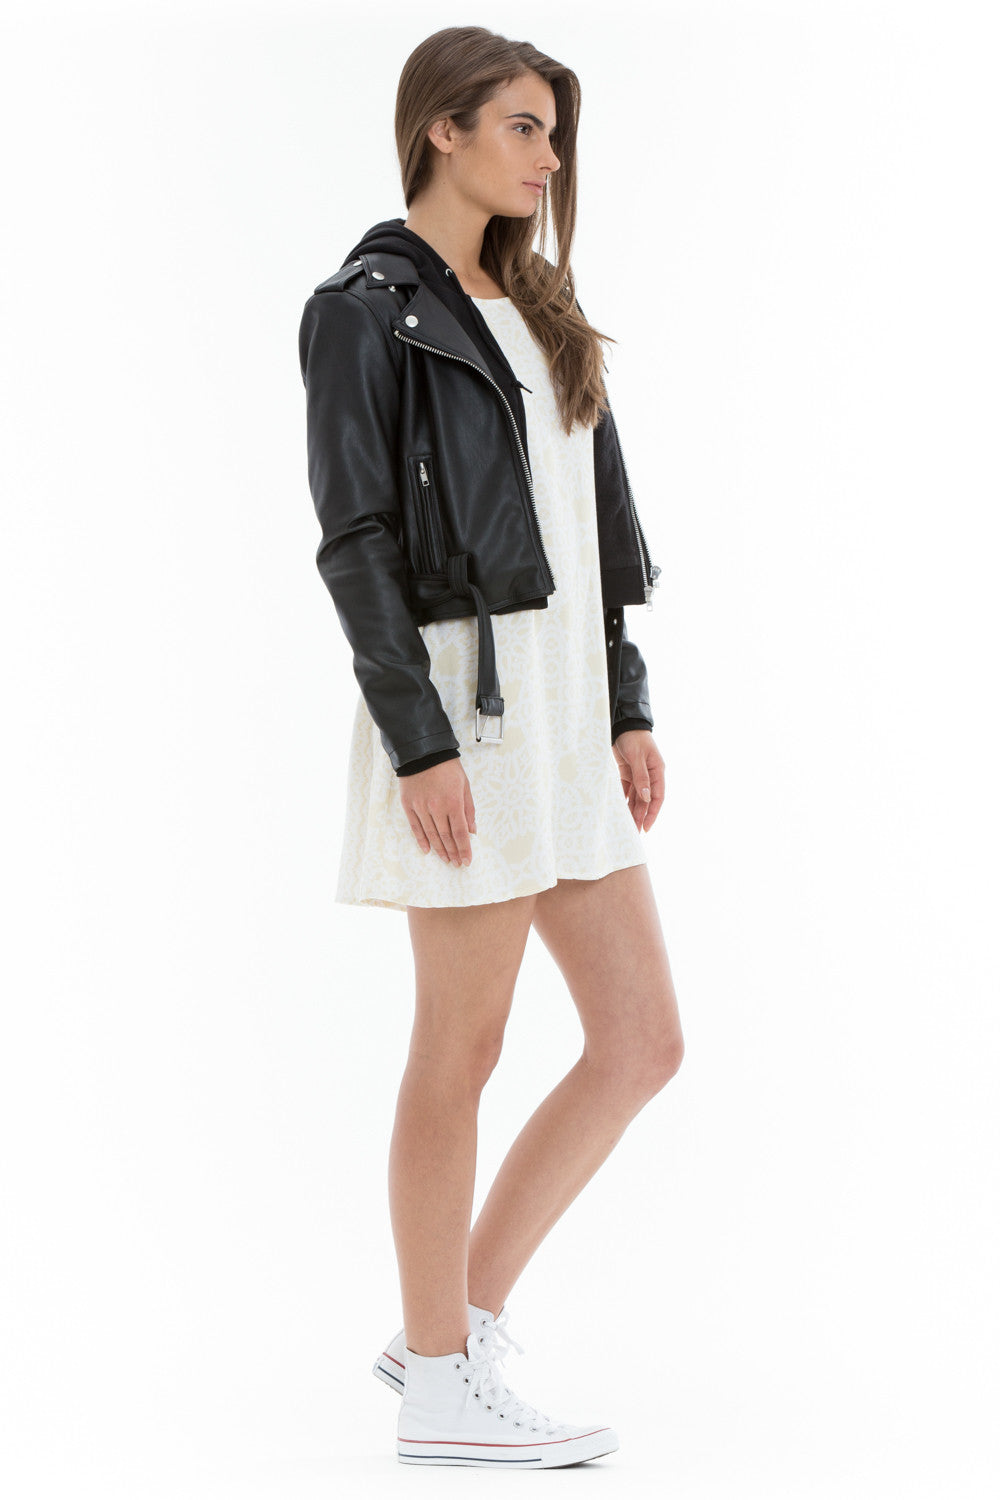 OBEY - One Love Women's Jacket, Black - The Giant Peach